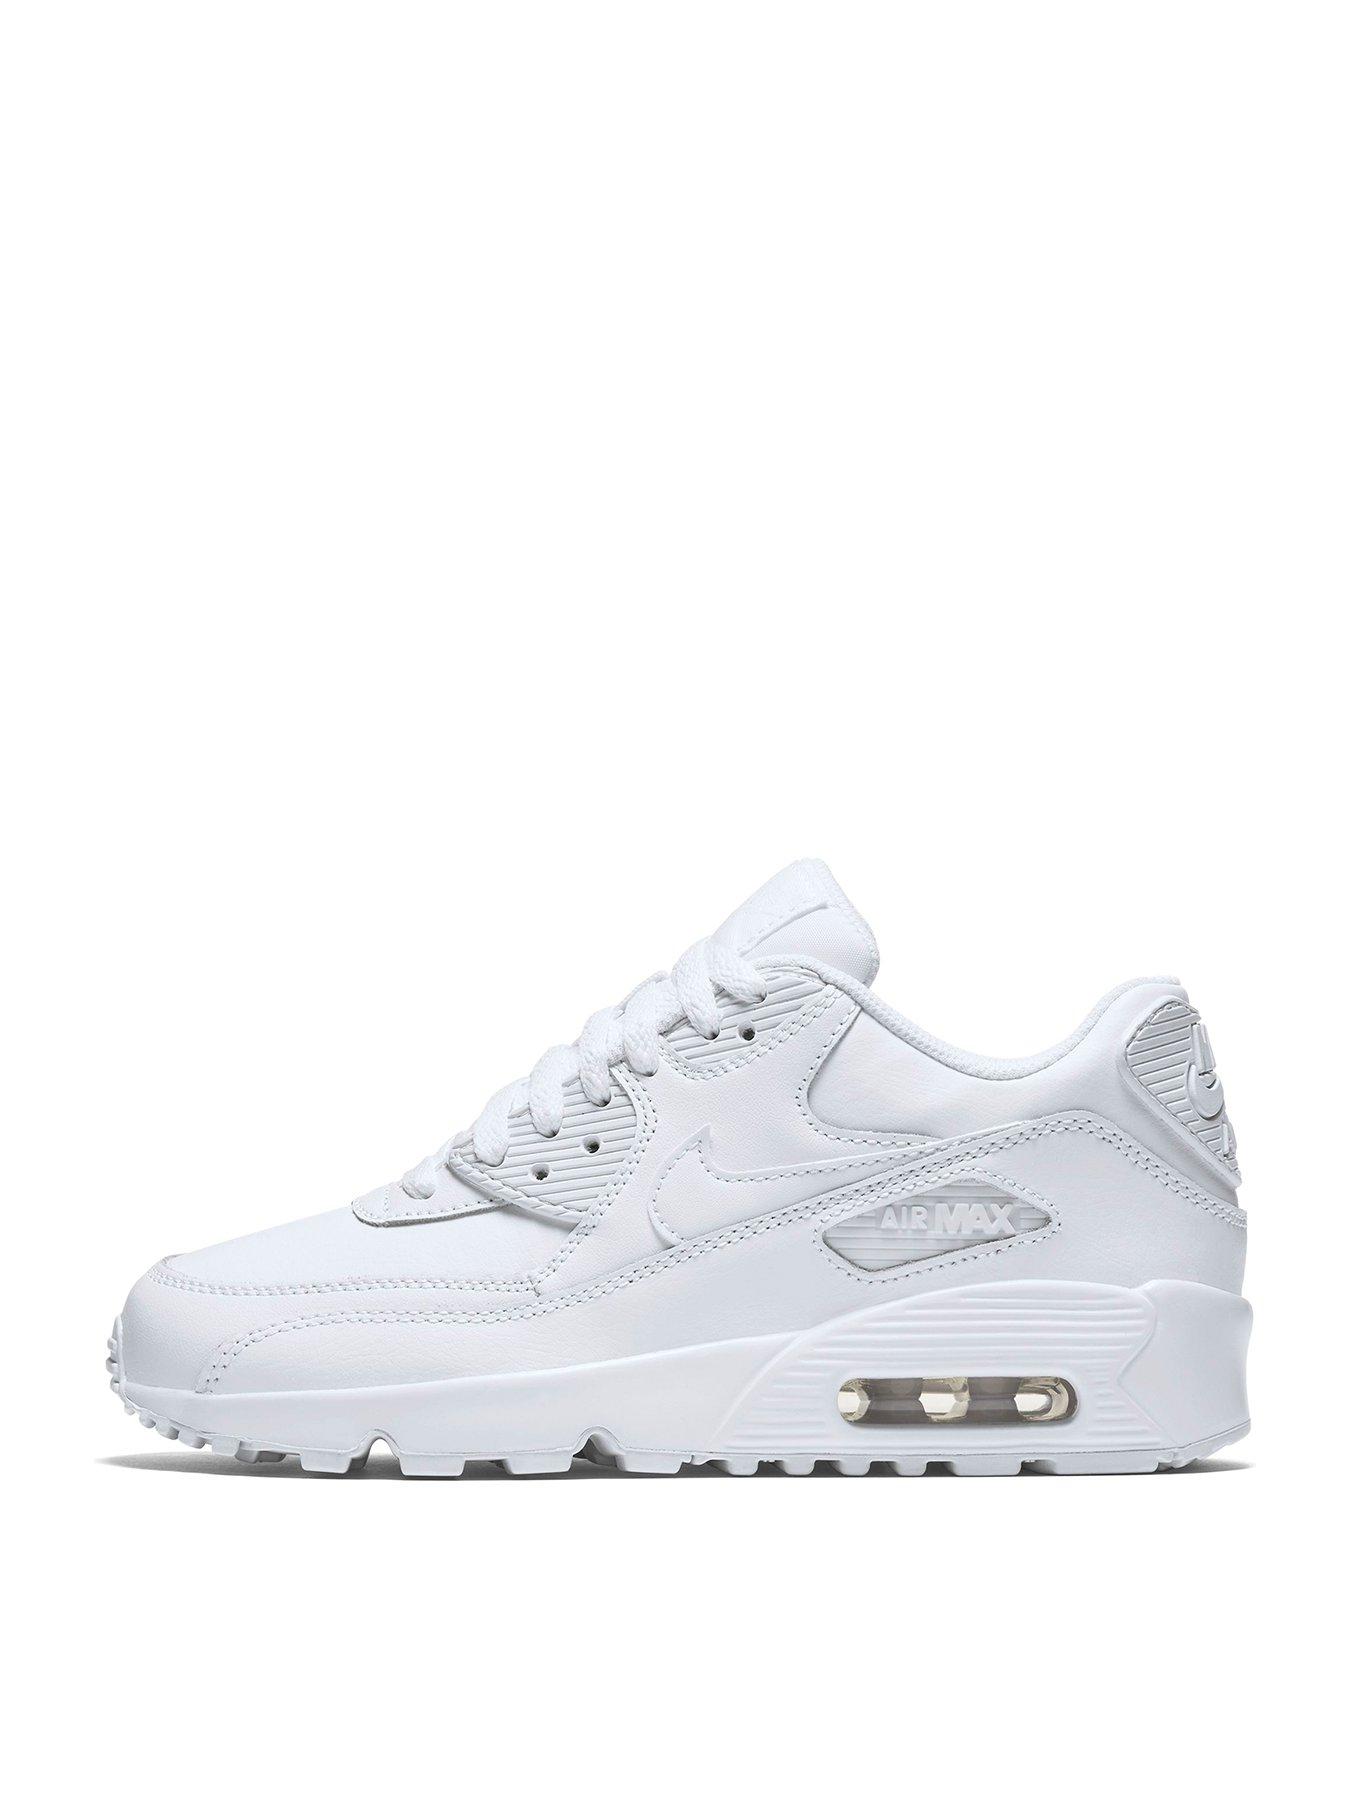 Nike Junior Air Max 90 Leather - White | littlewoods.com